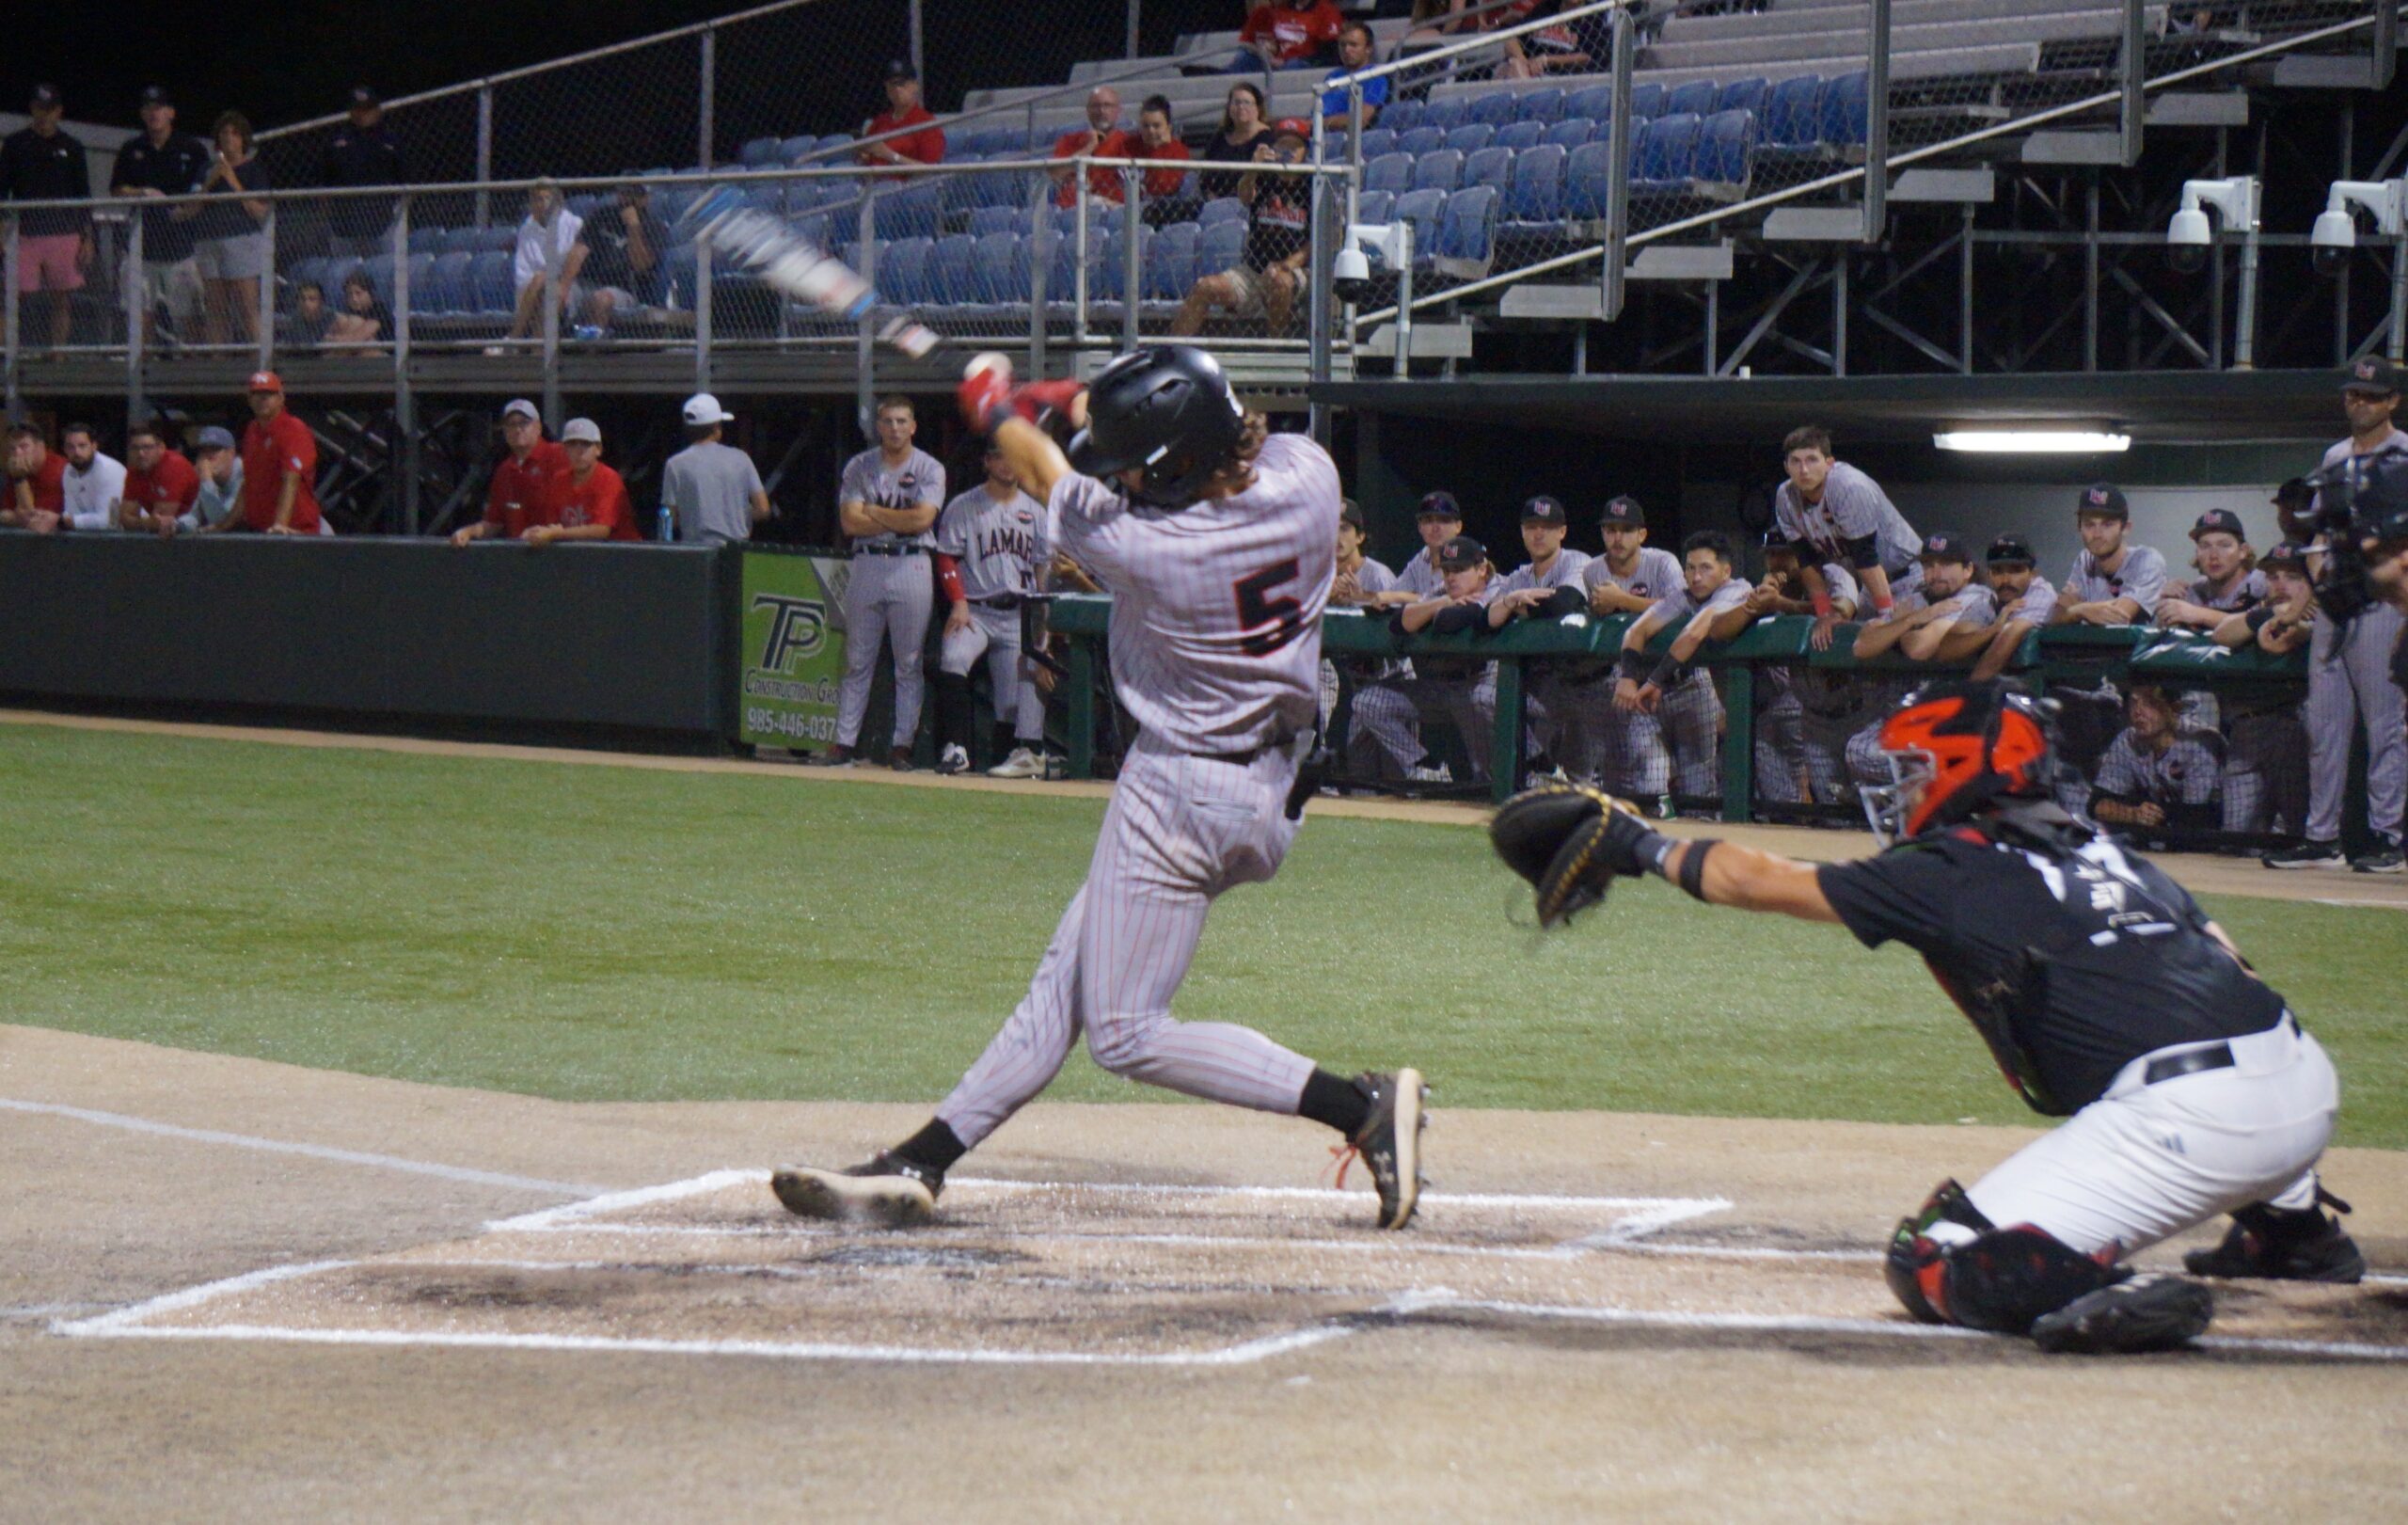 Thumbnail for Extra-inning loss to Lamar cost Nicholls baseball team shot at first place in SLC